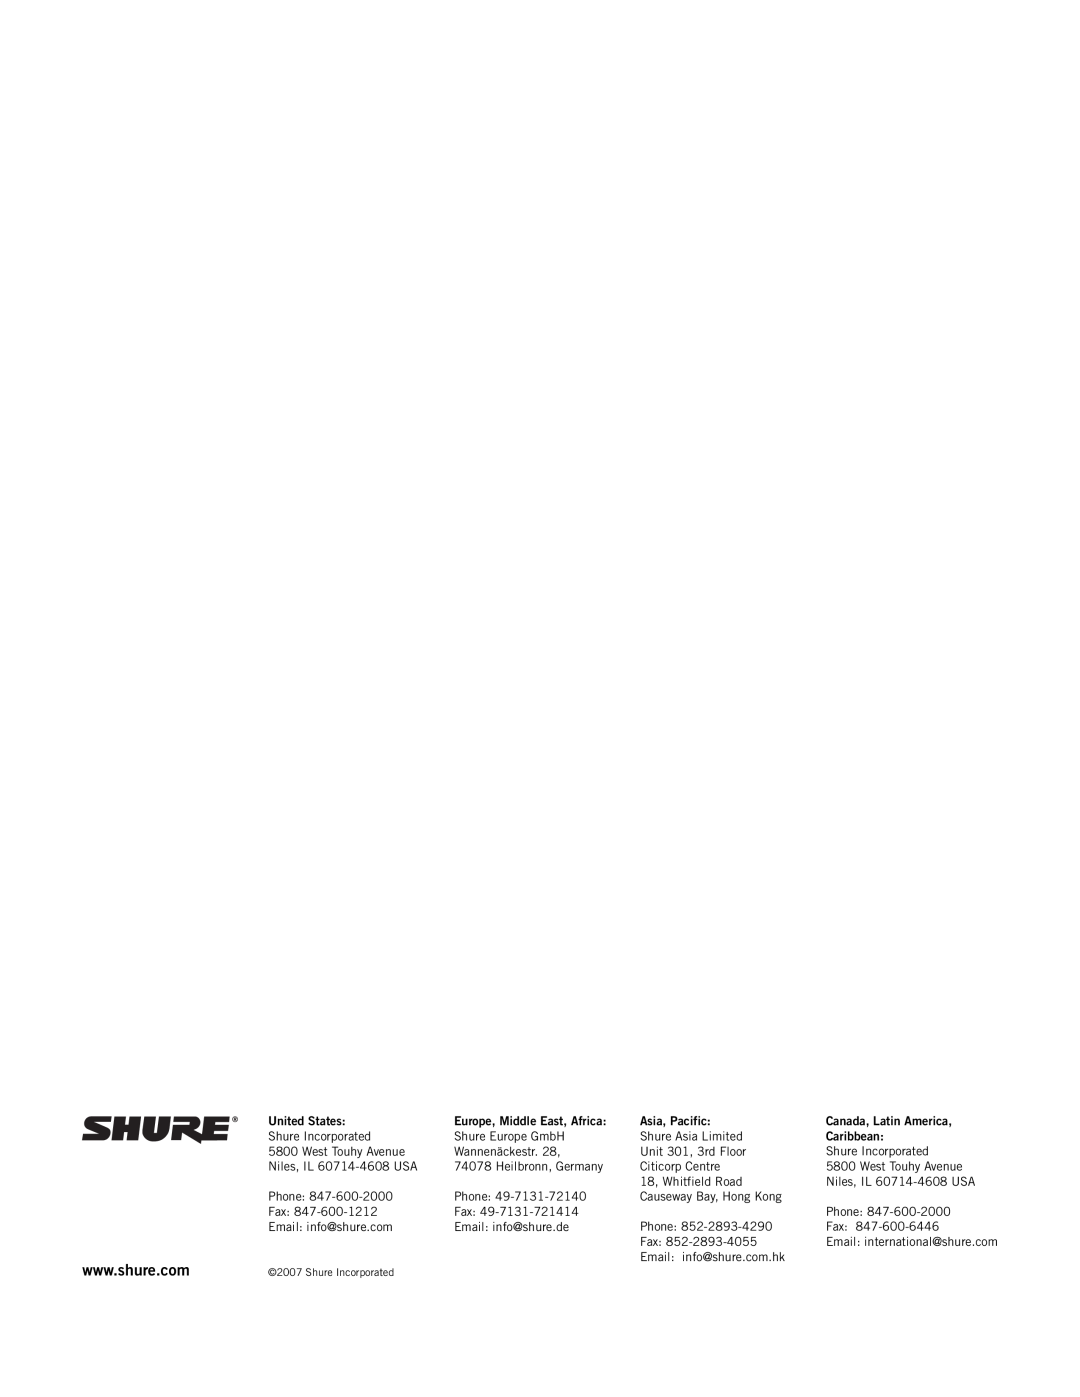 Shure DFR11EQ manual United States, Europe, Middle East, Africa, Asia, Pacific, Canada, Latin America, Caribbean 